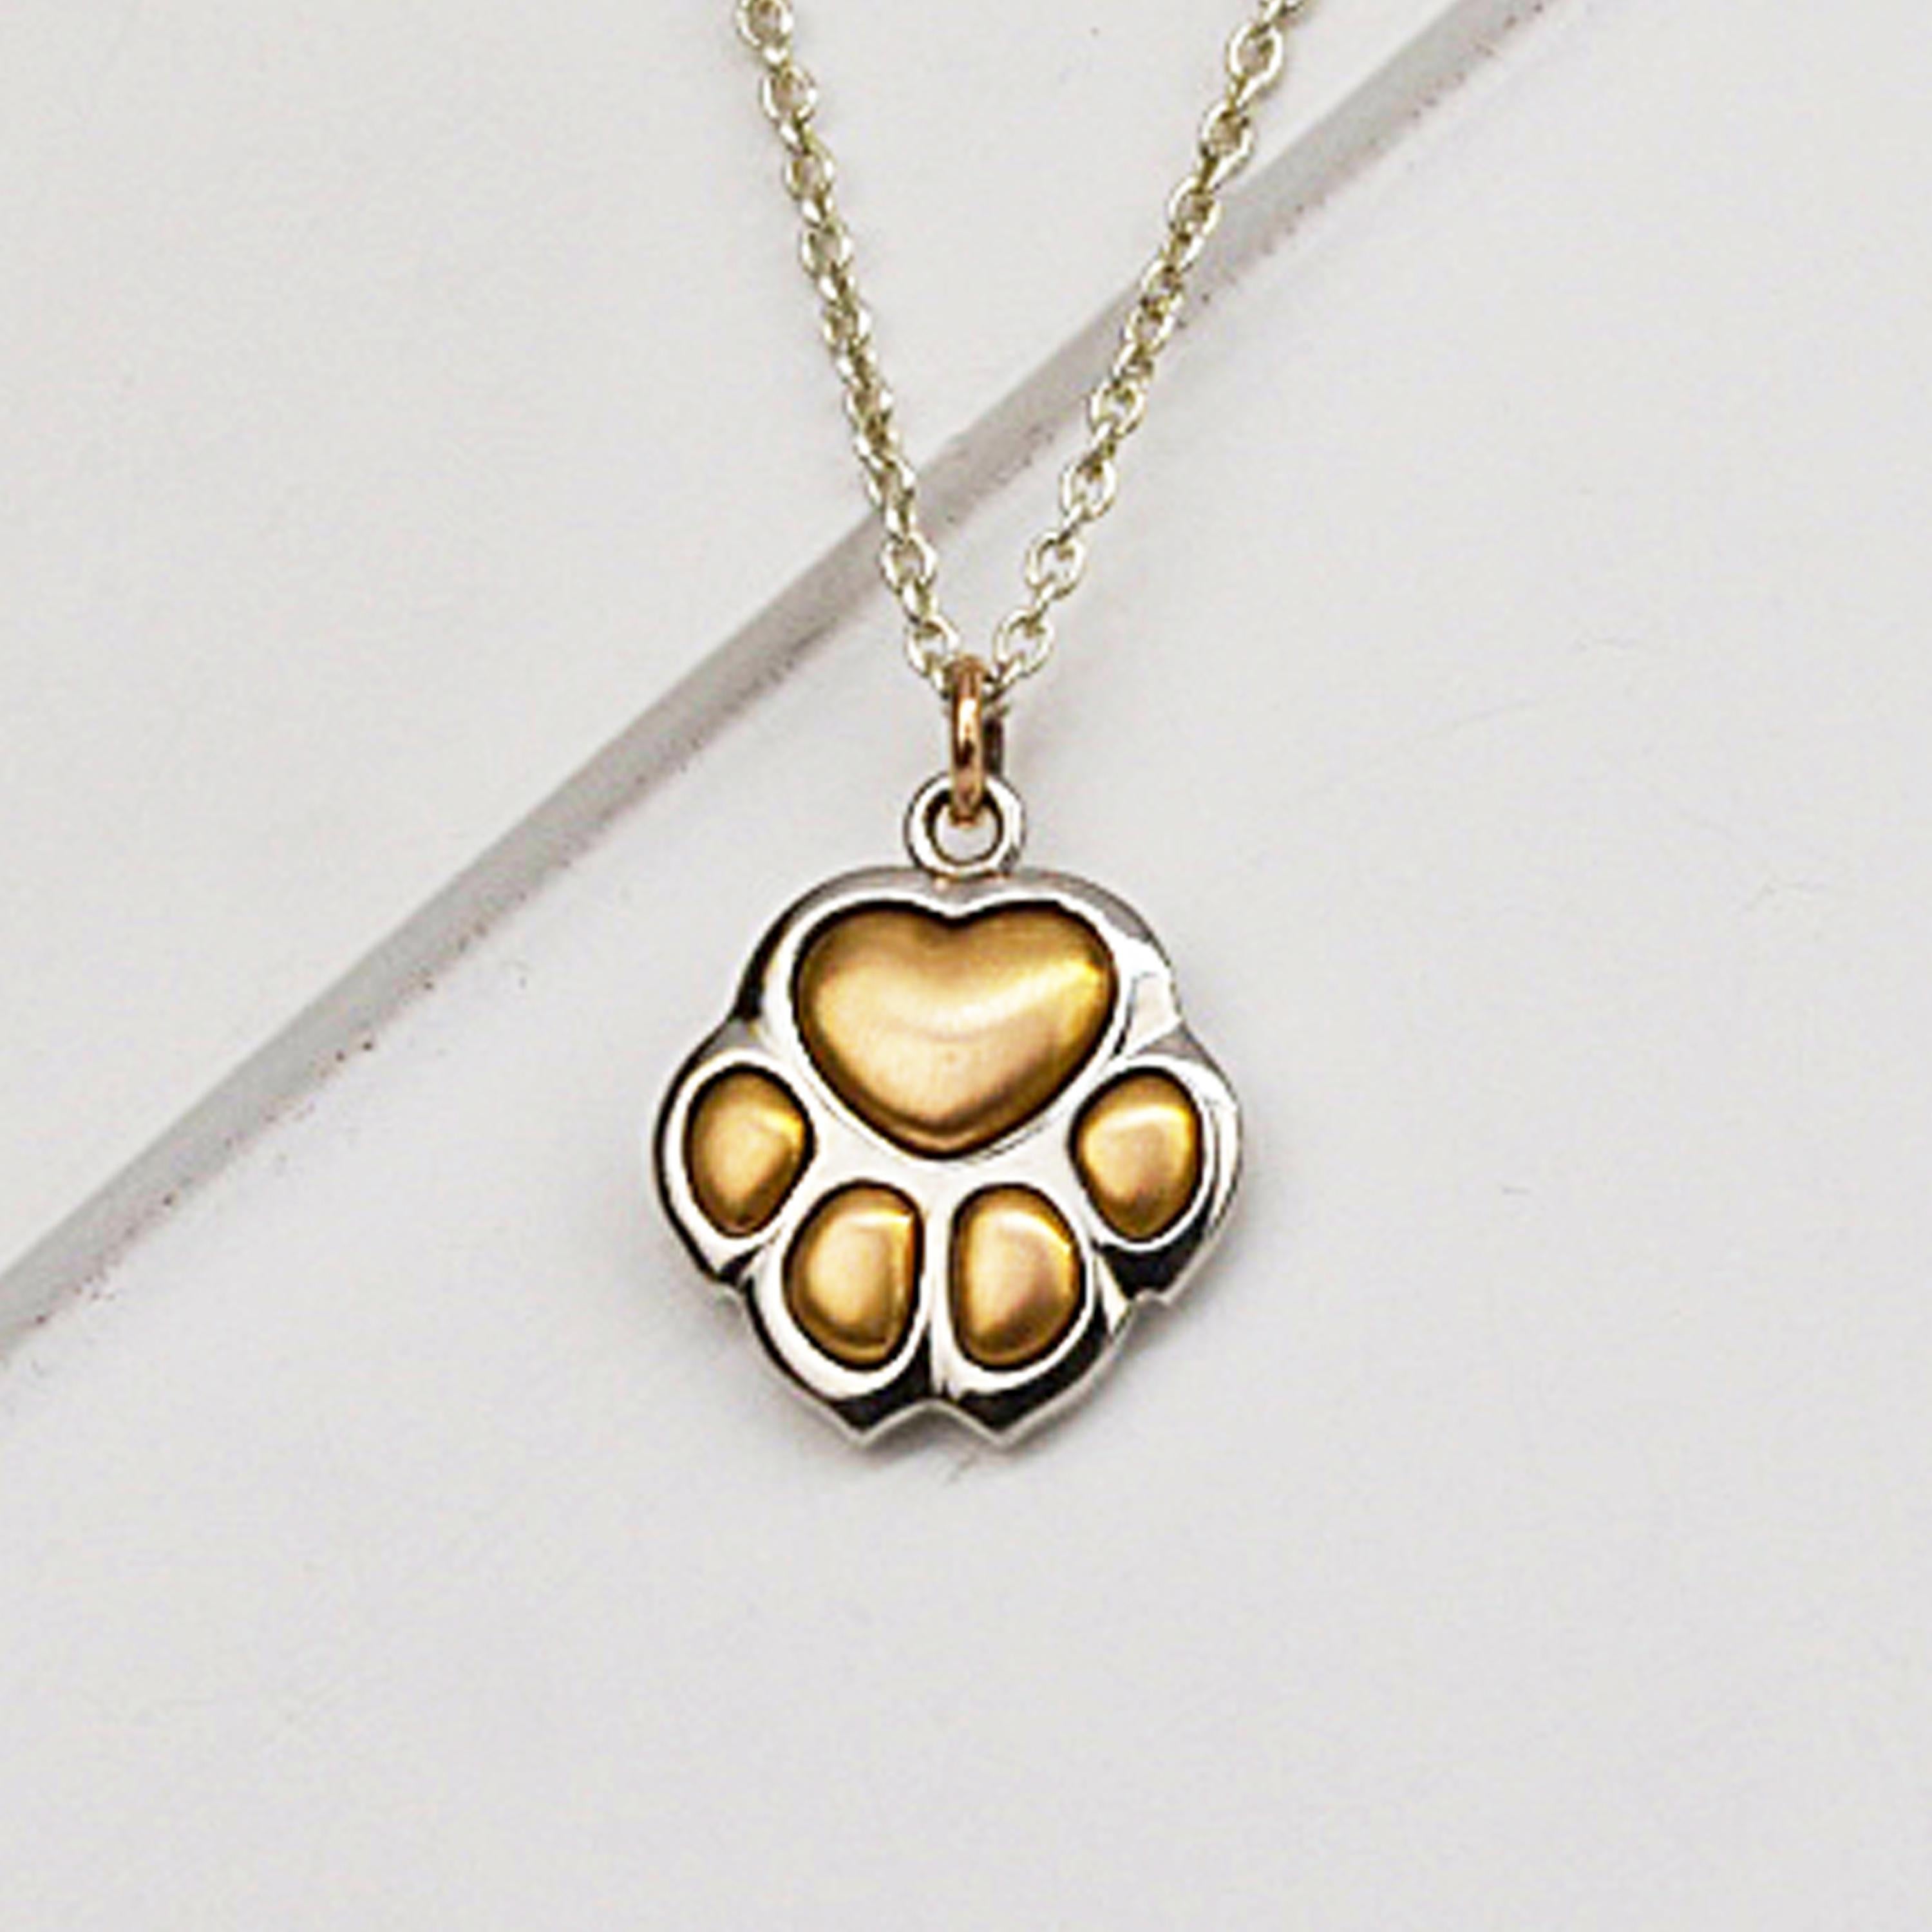 Contemporary Matthew Cambery 18K White and Rose Gold Puppy Paw Pendant with Diamond Set Chain For Sale